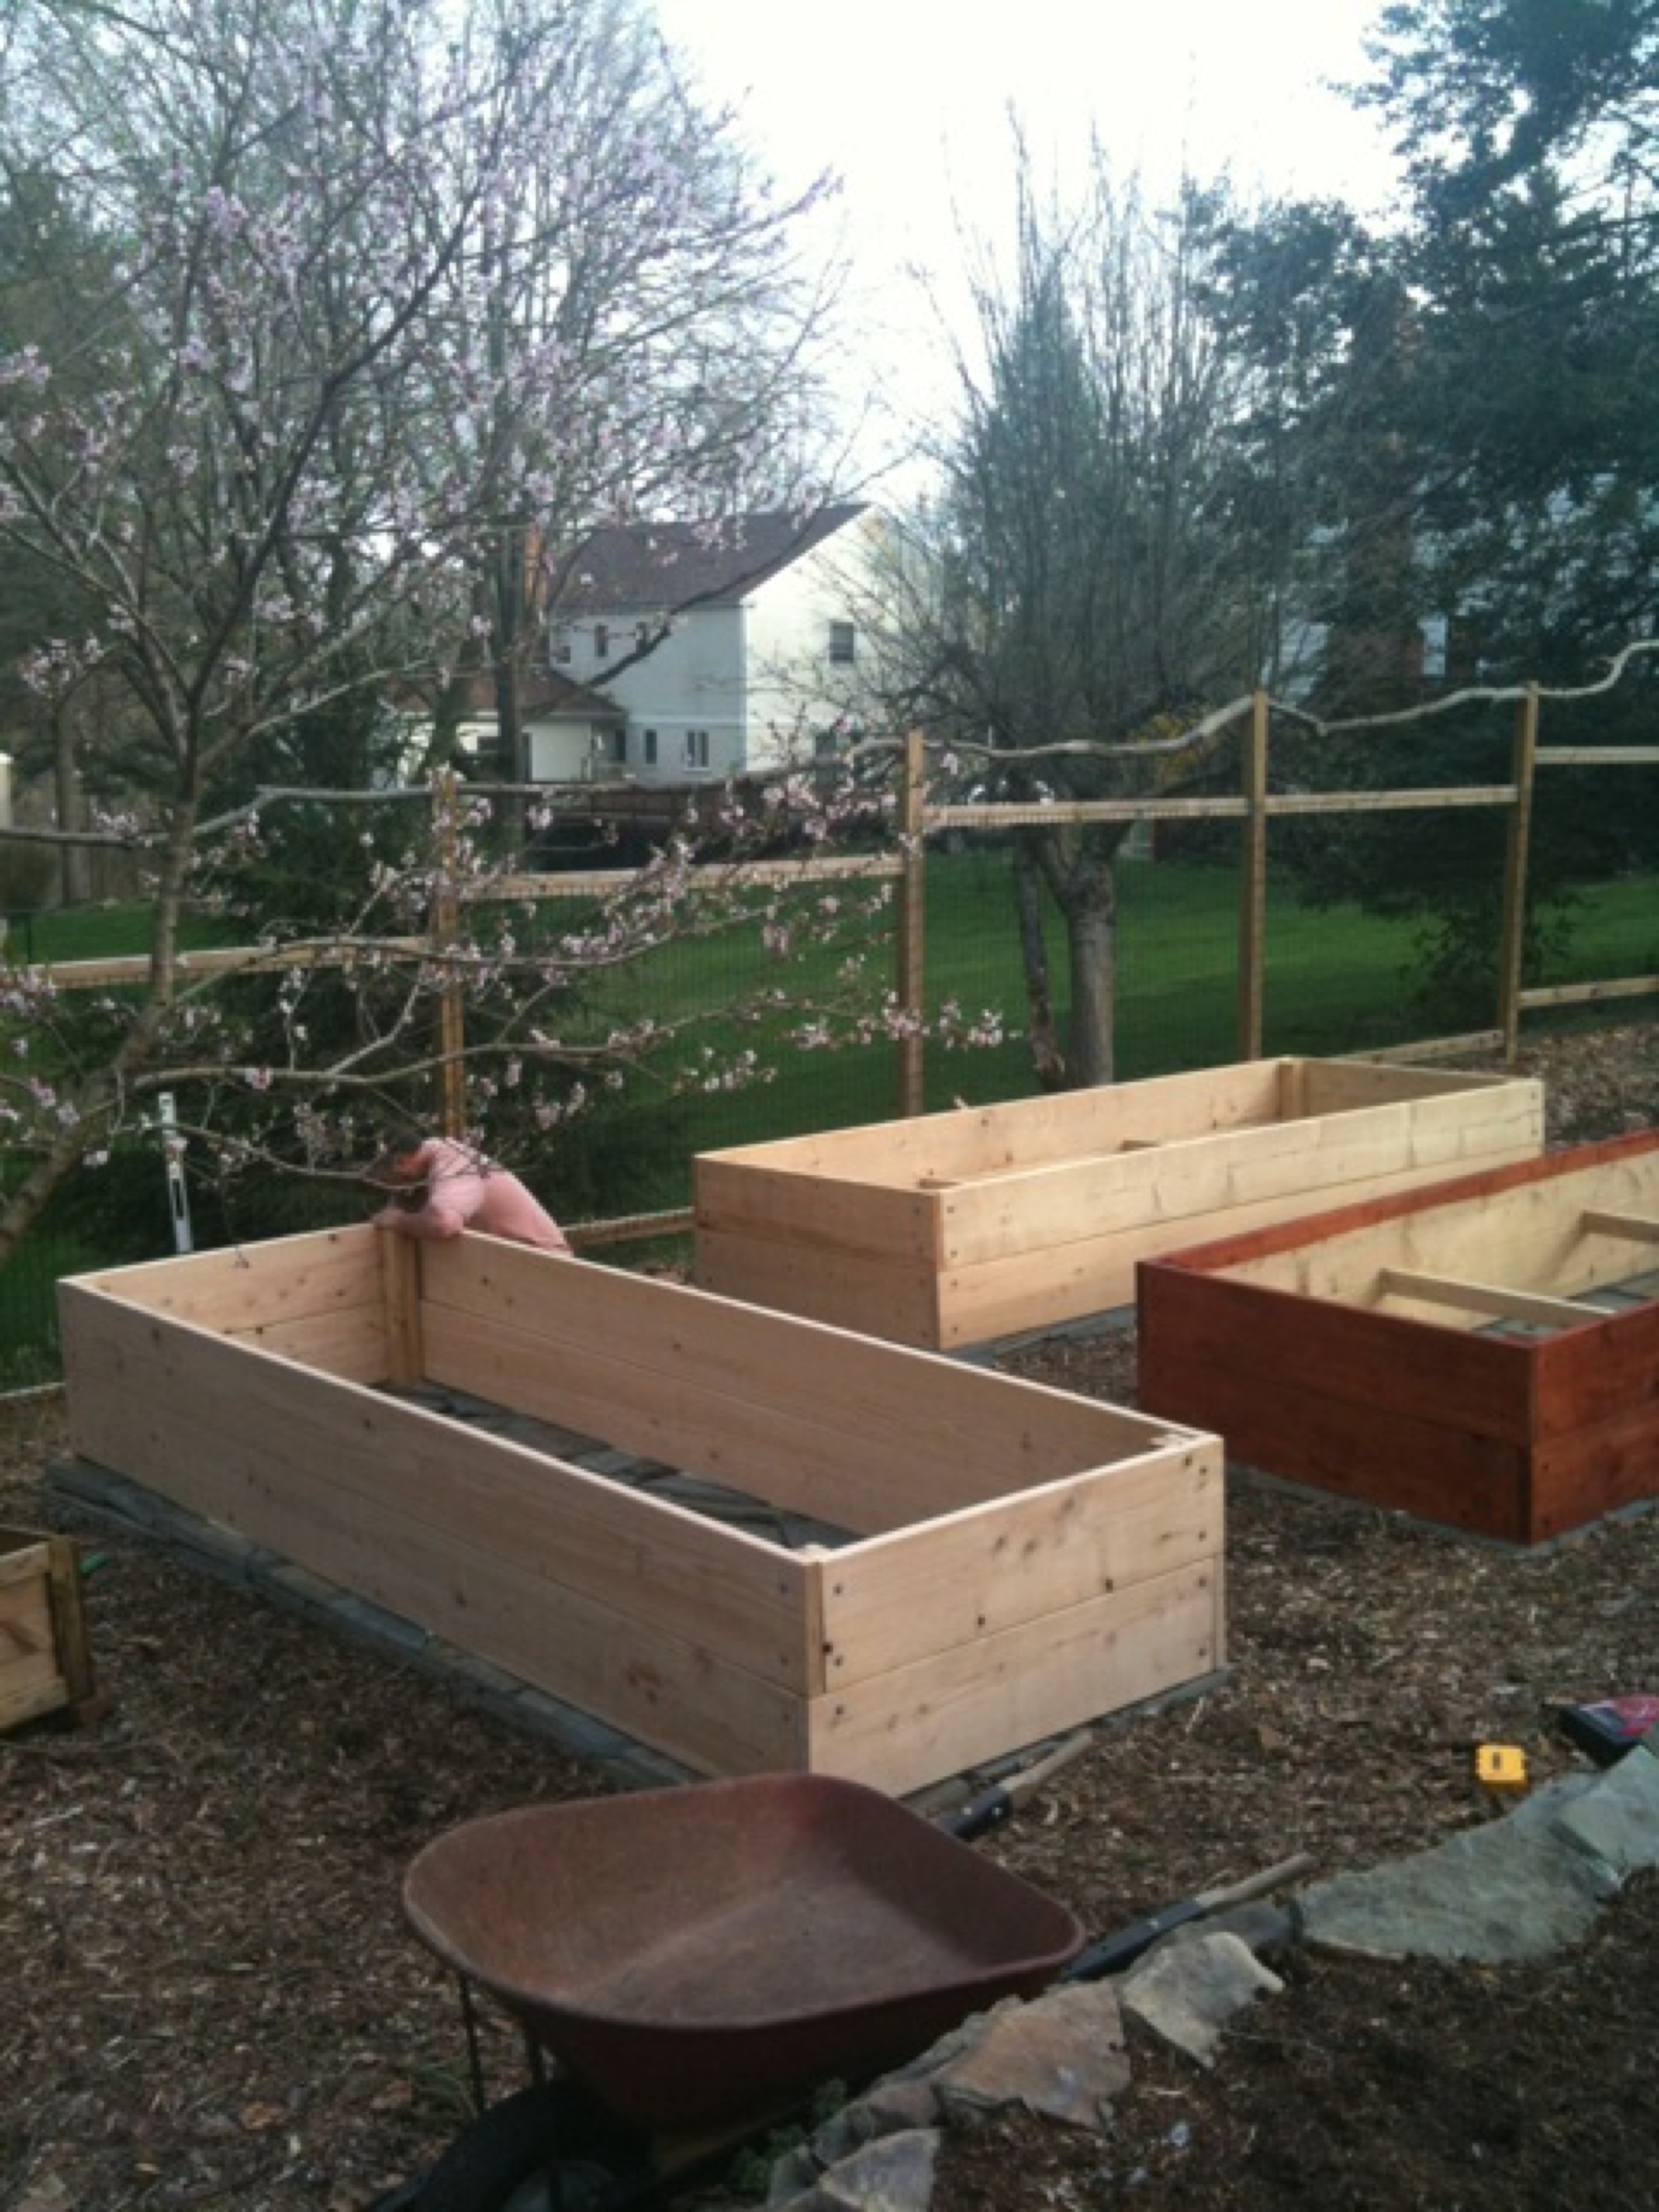 Raised Beds. The start of an urban homestead.